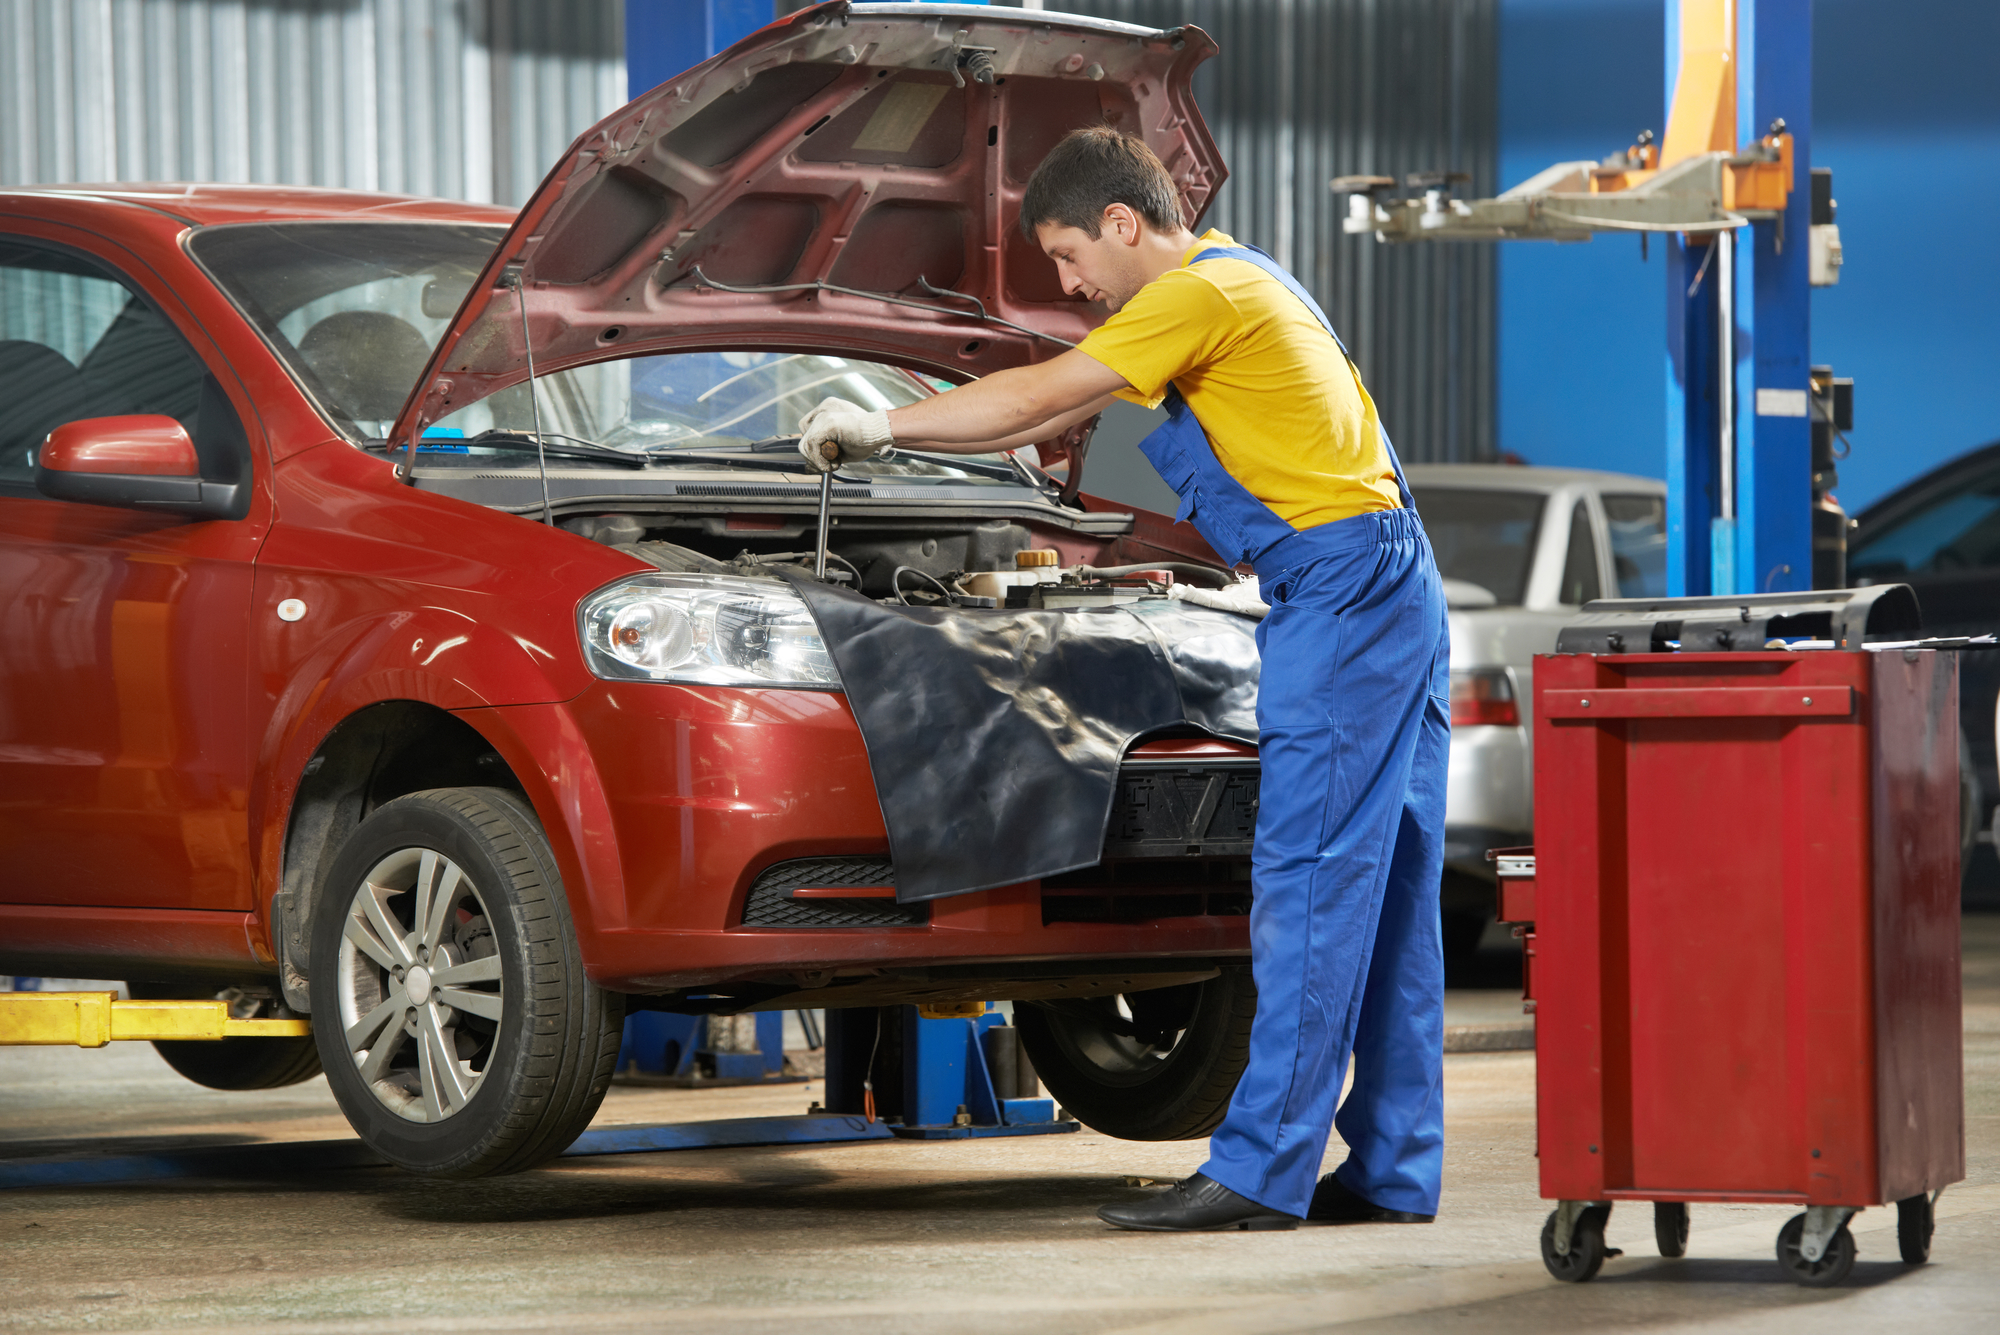 Auto Repair Shops Near Me - Find the Right One in Phoenix